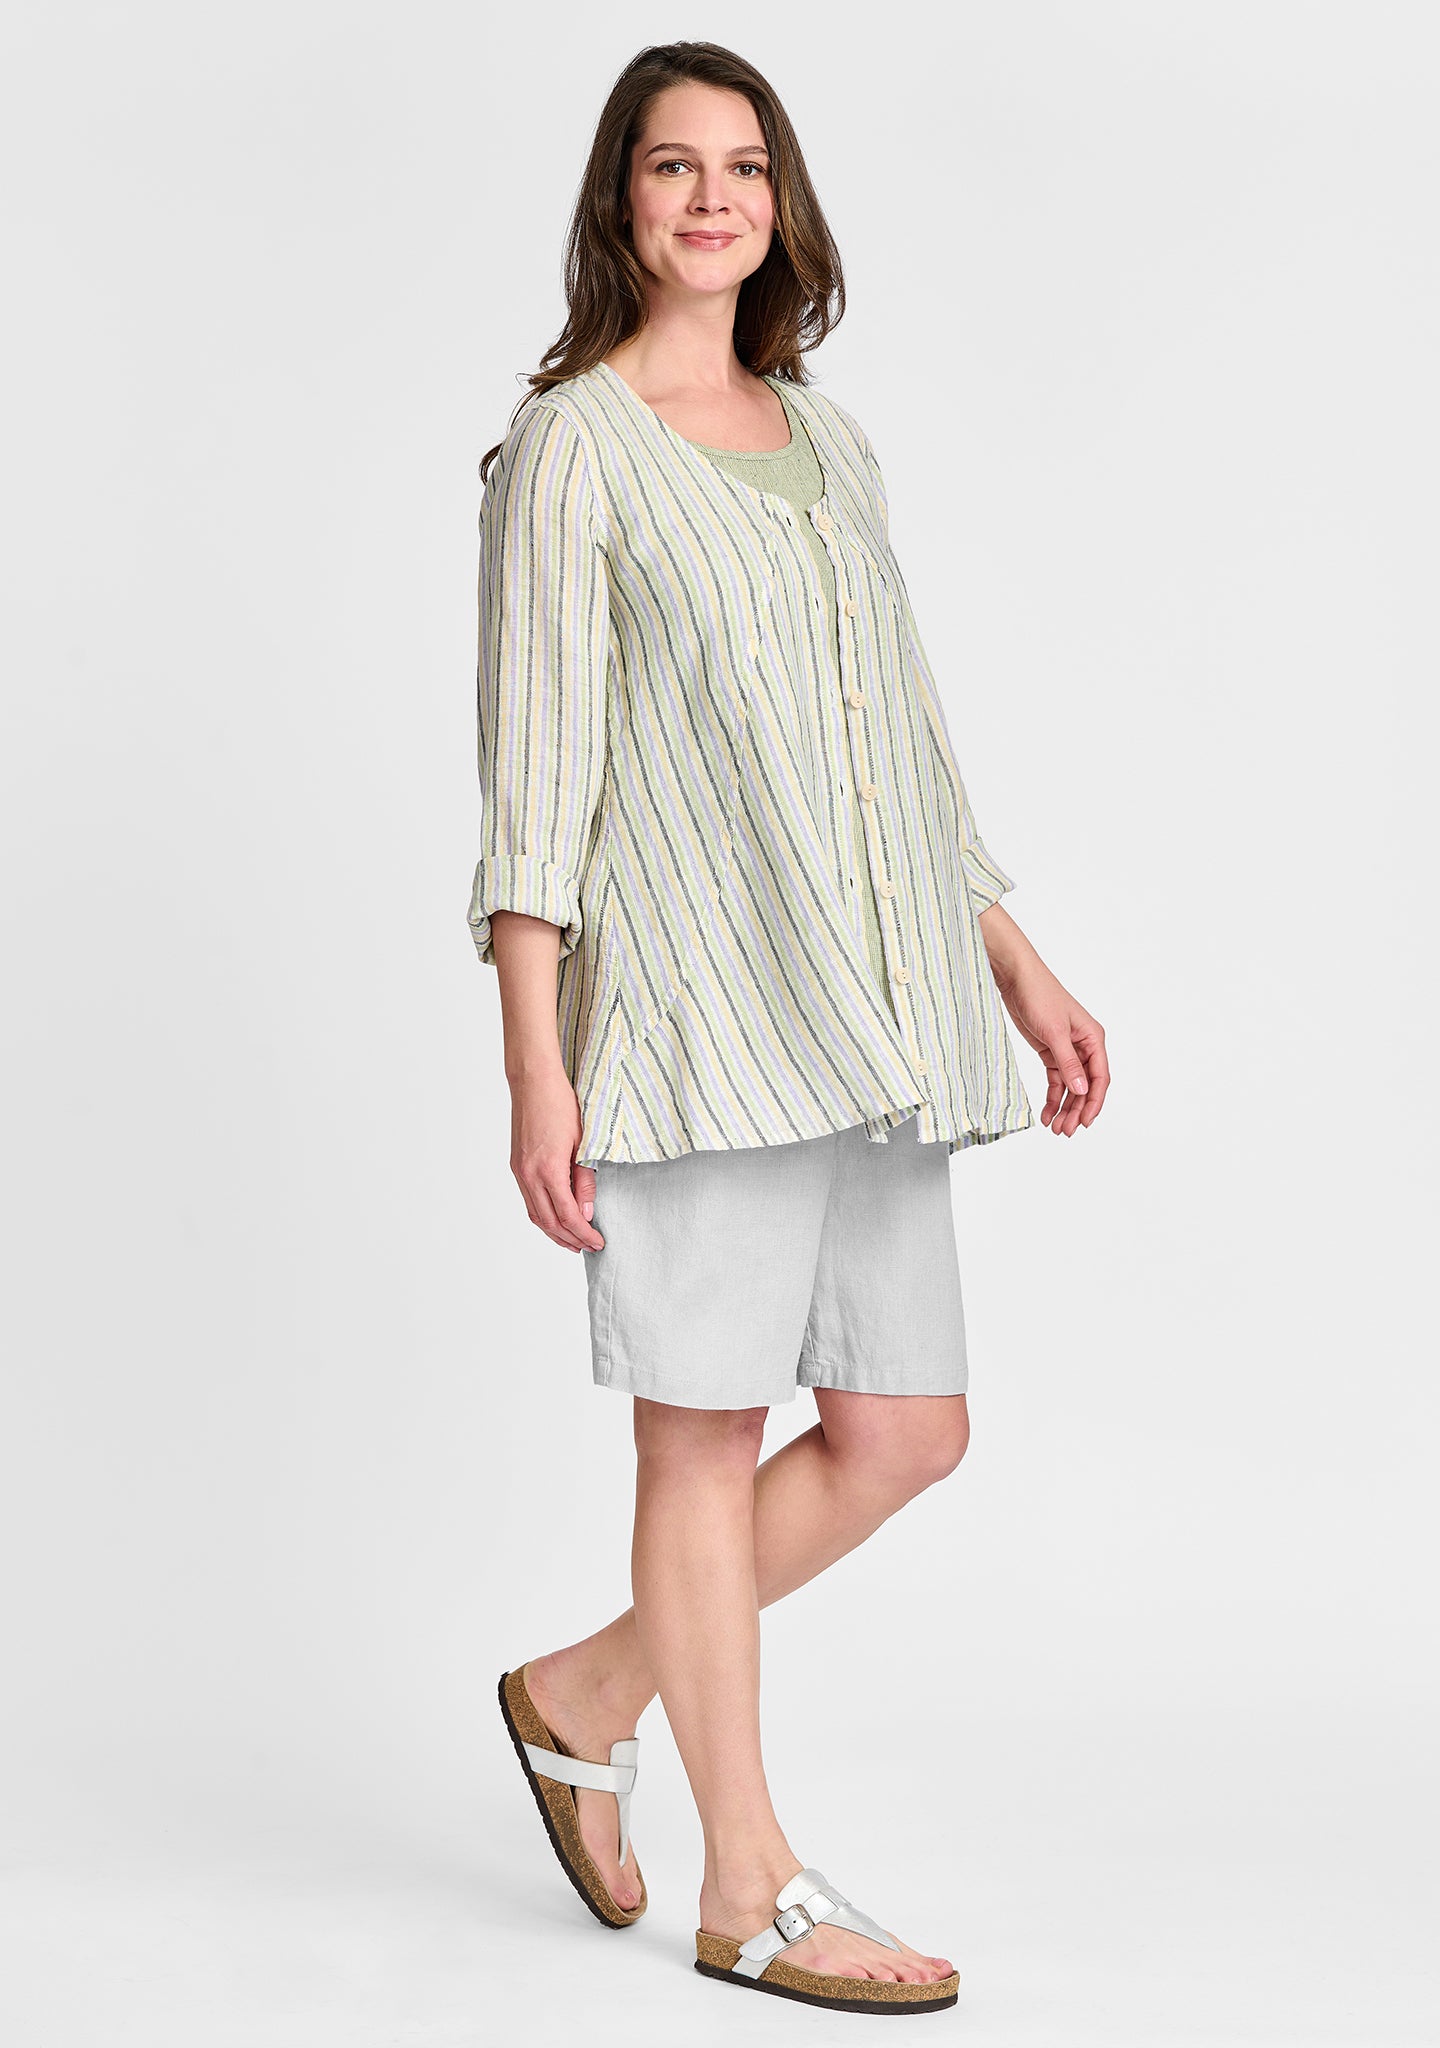 FLAX linen blouse in stripes with linen shorts in grey